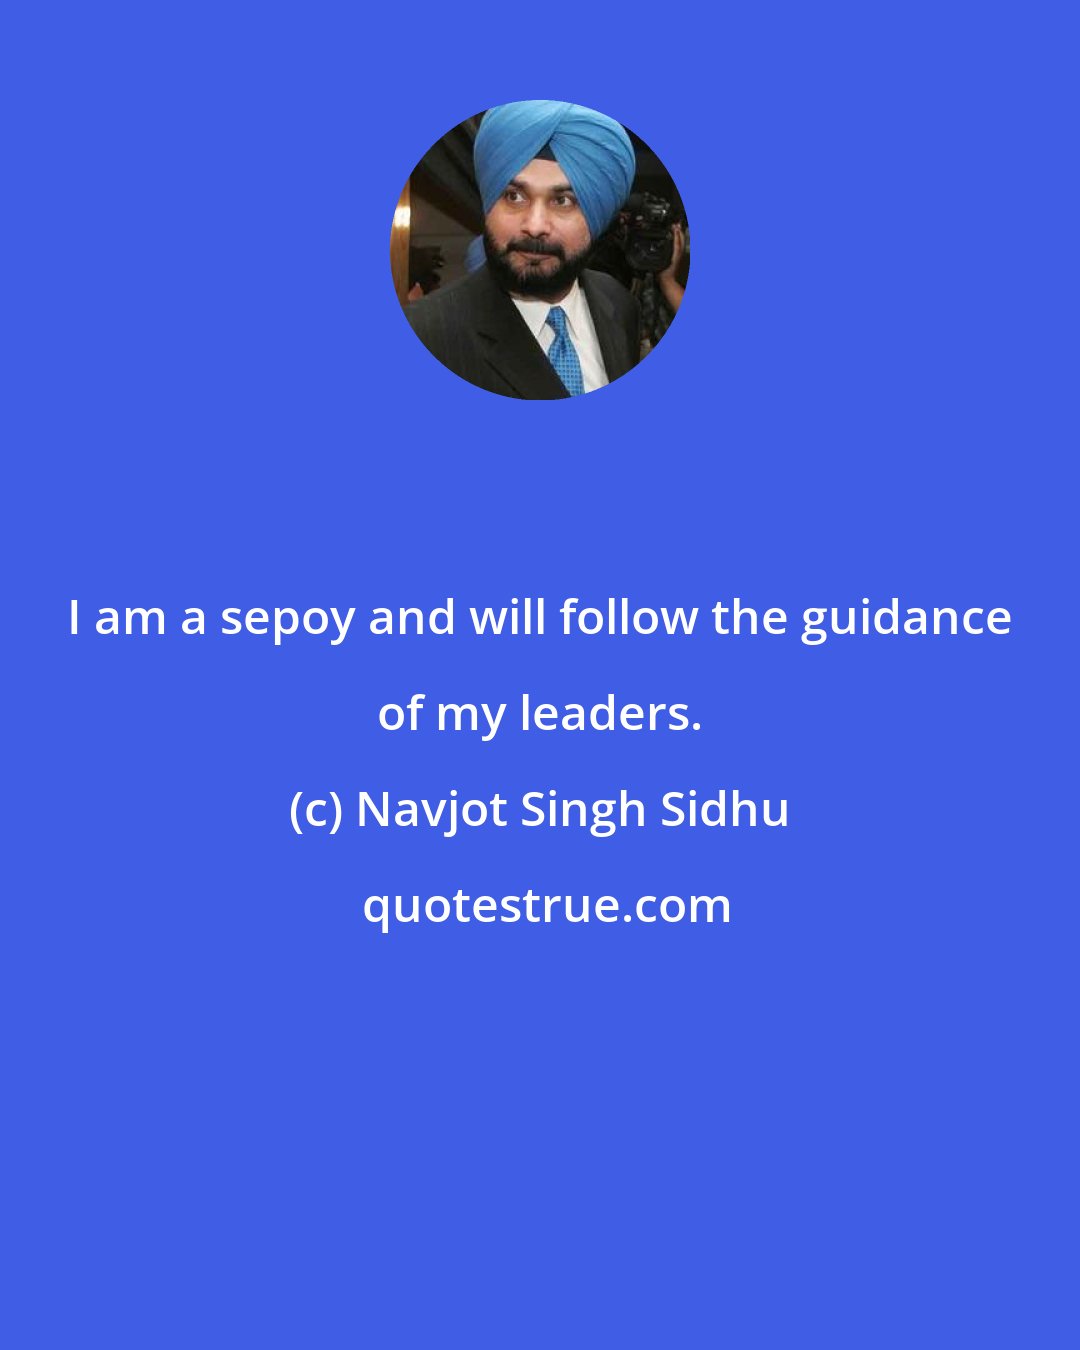 Navjot Singh Sidhu: I am a sepoy and will follow the guidance of my leaders.